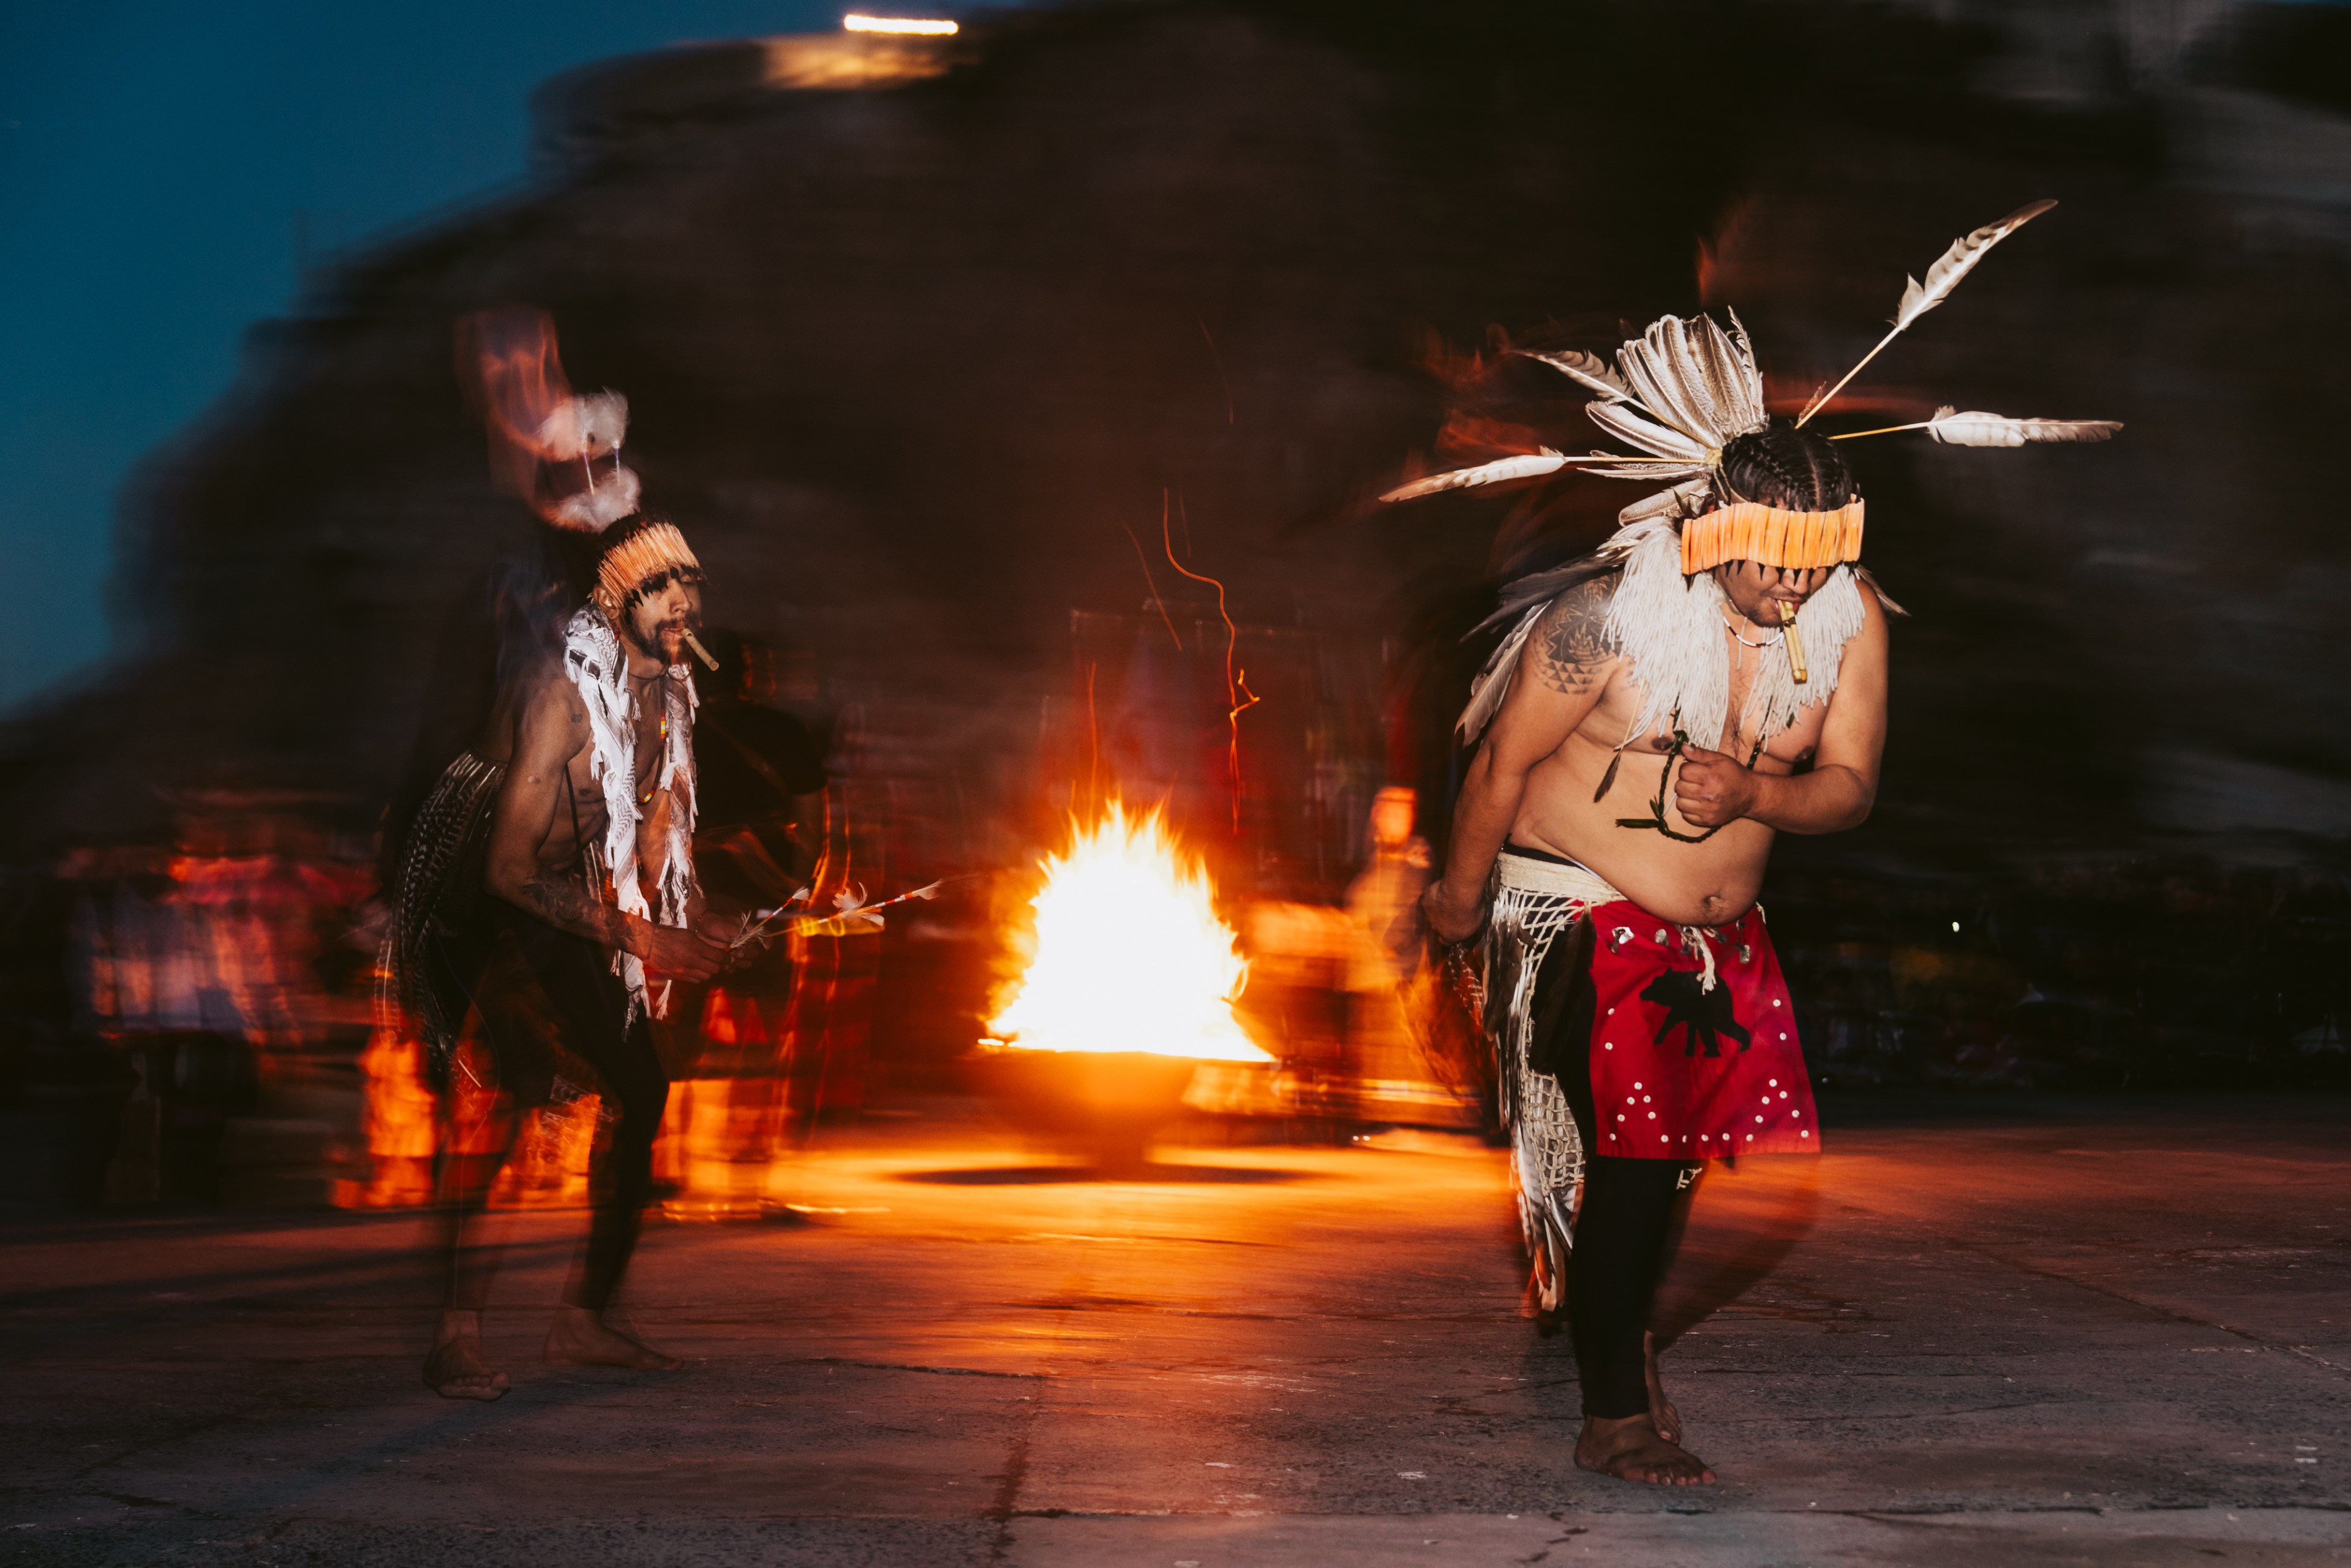 Two dancers in feathered headdresses dance by a fire under a dark sky.